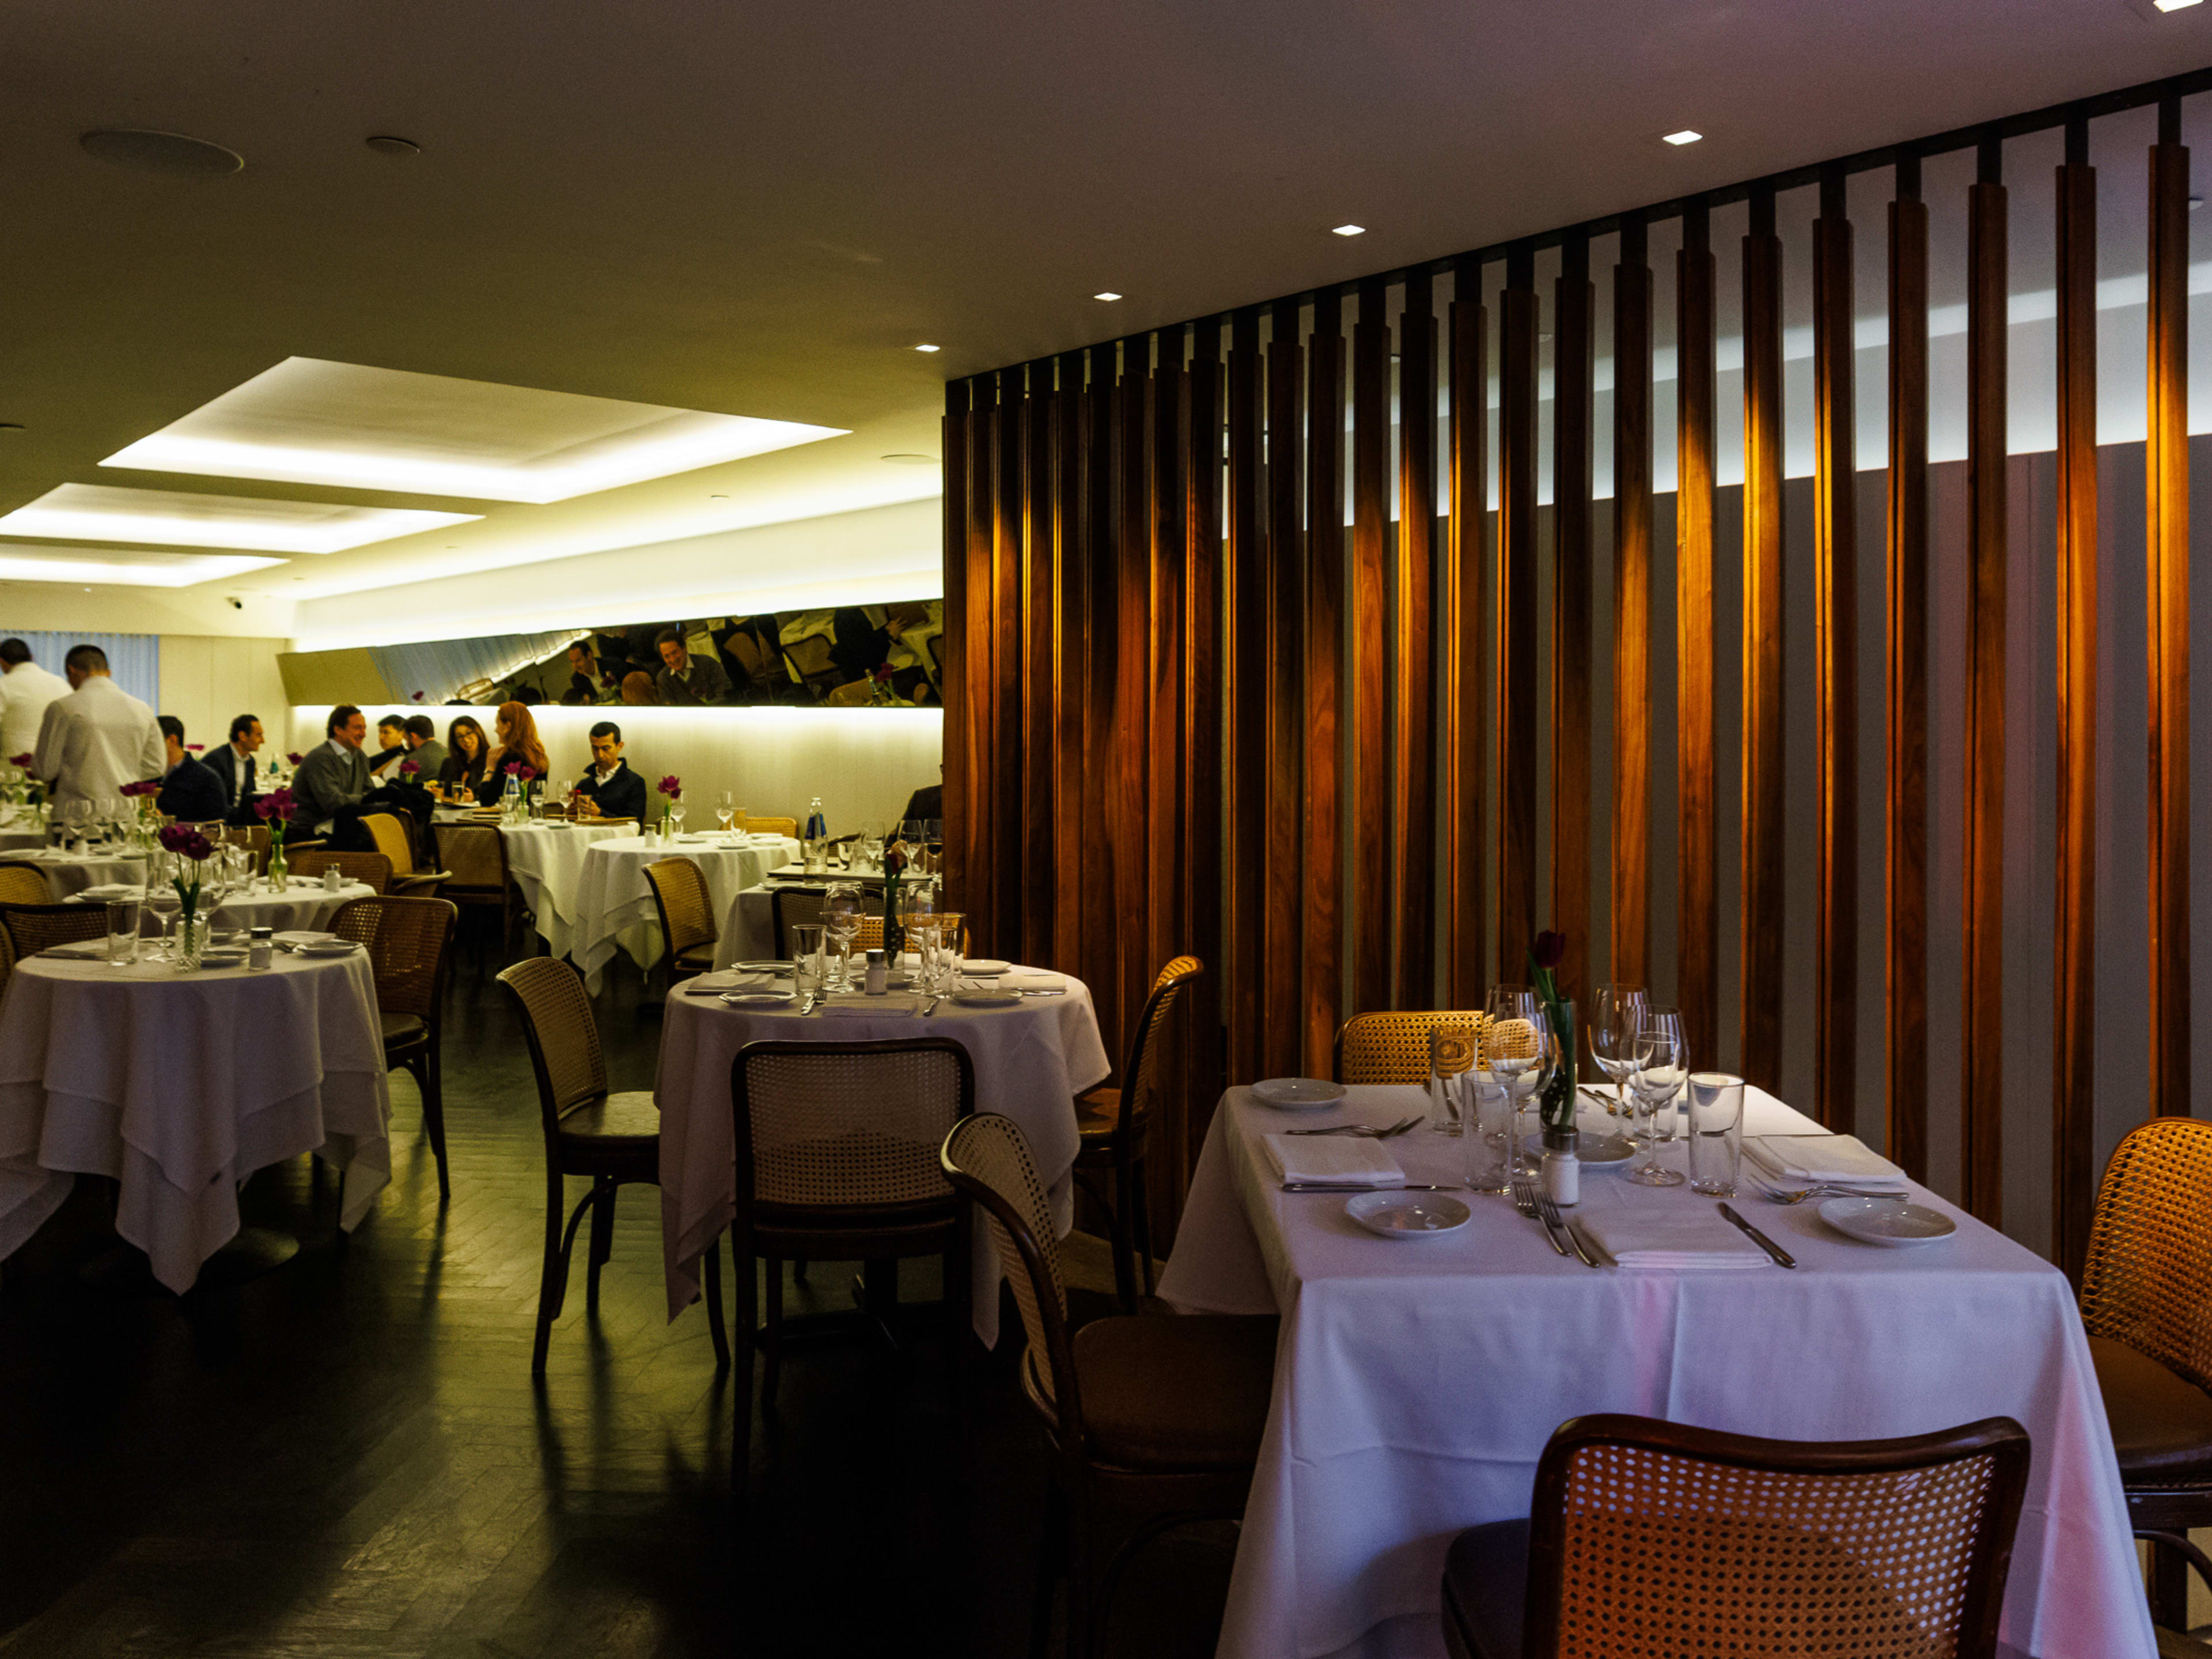 Il Gattopardo interiors with wooden beam walls, dim lighting, and formal dining tables with white tablecloths